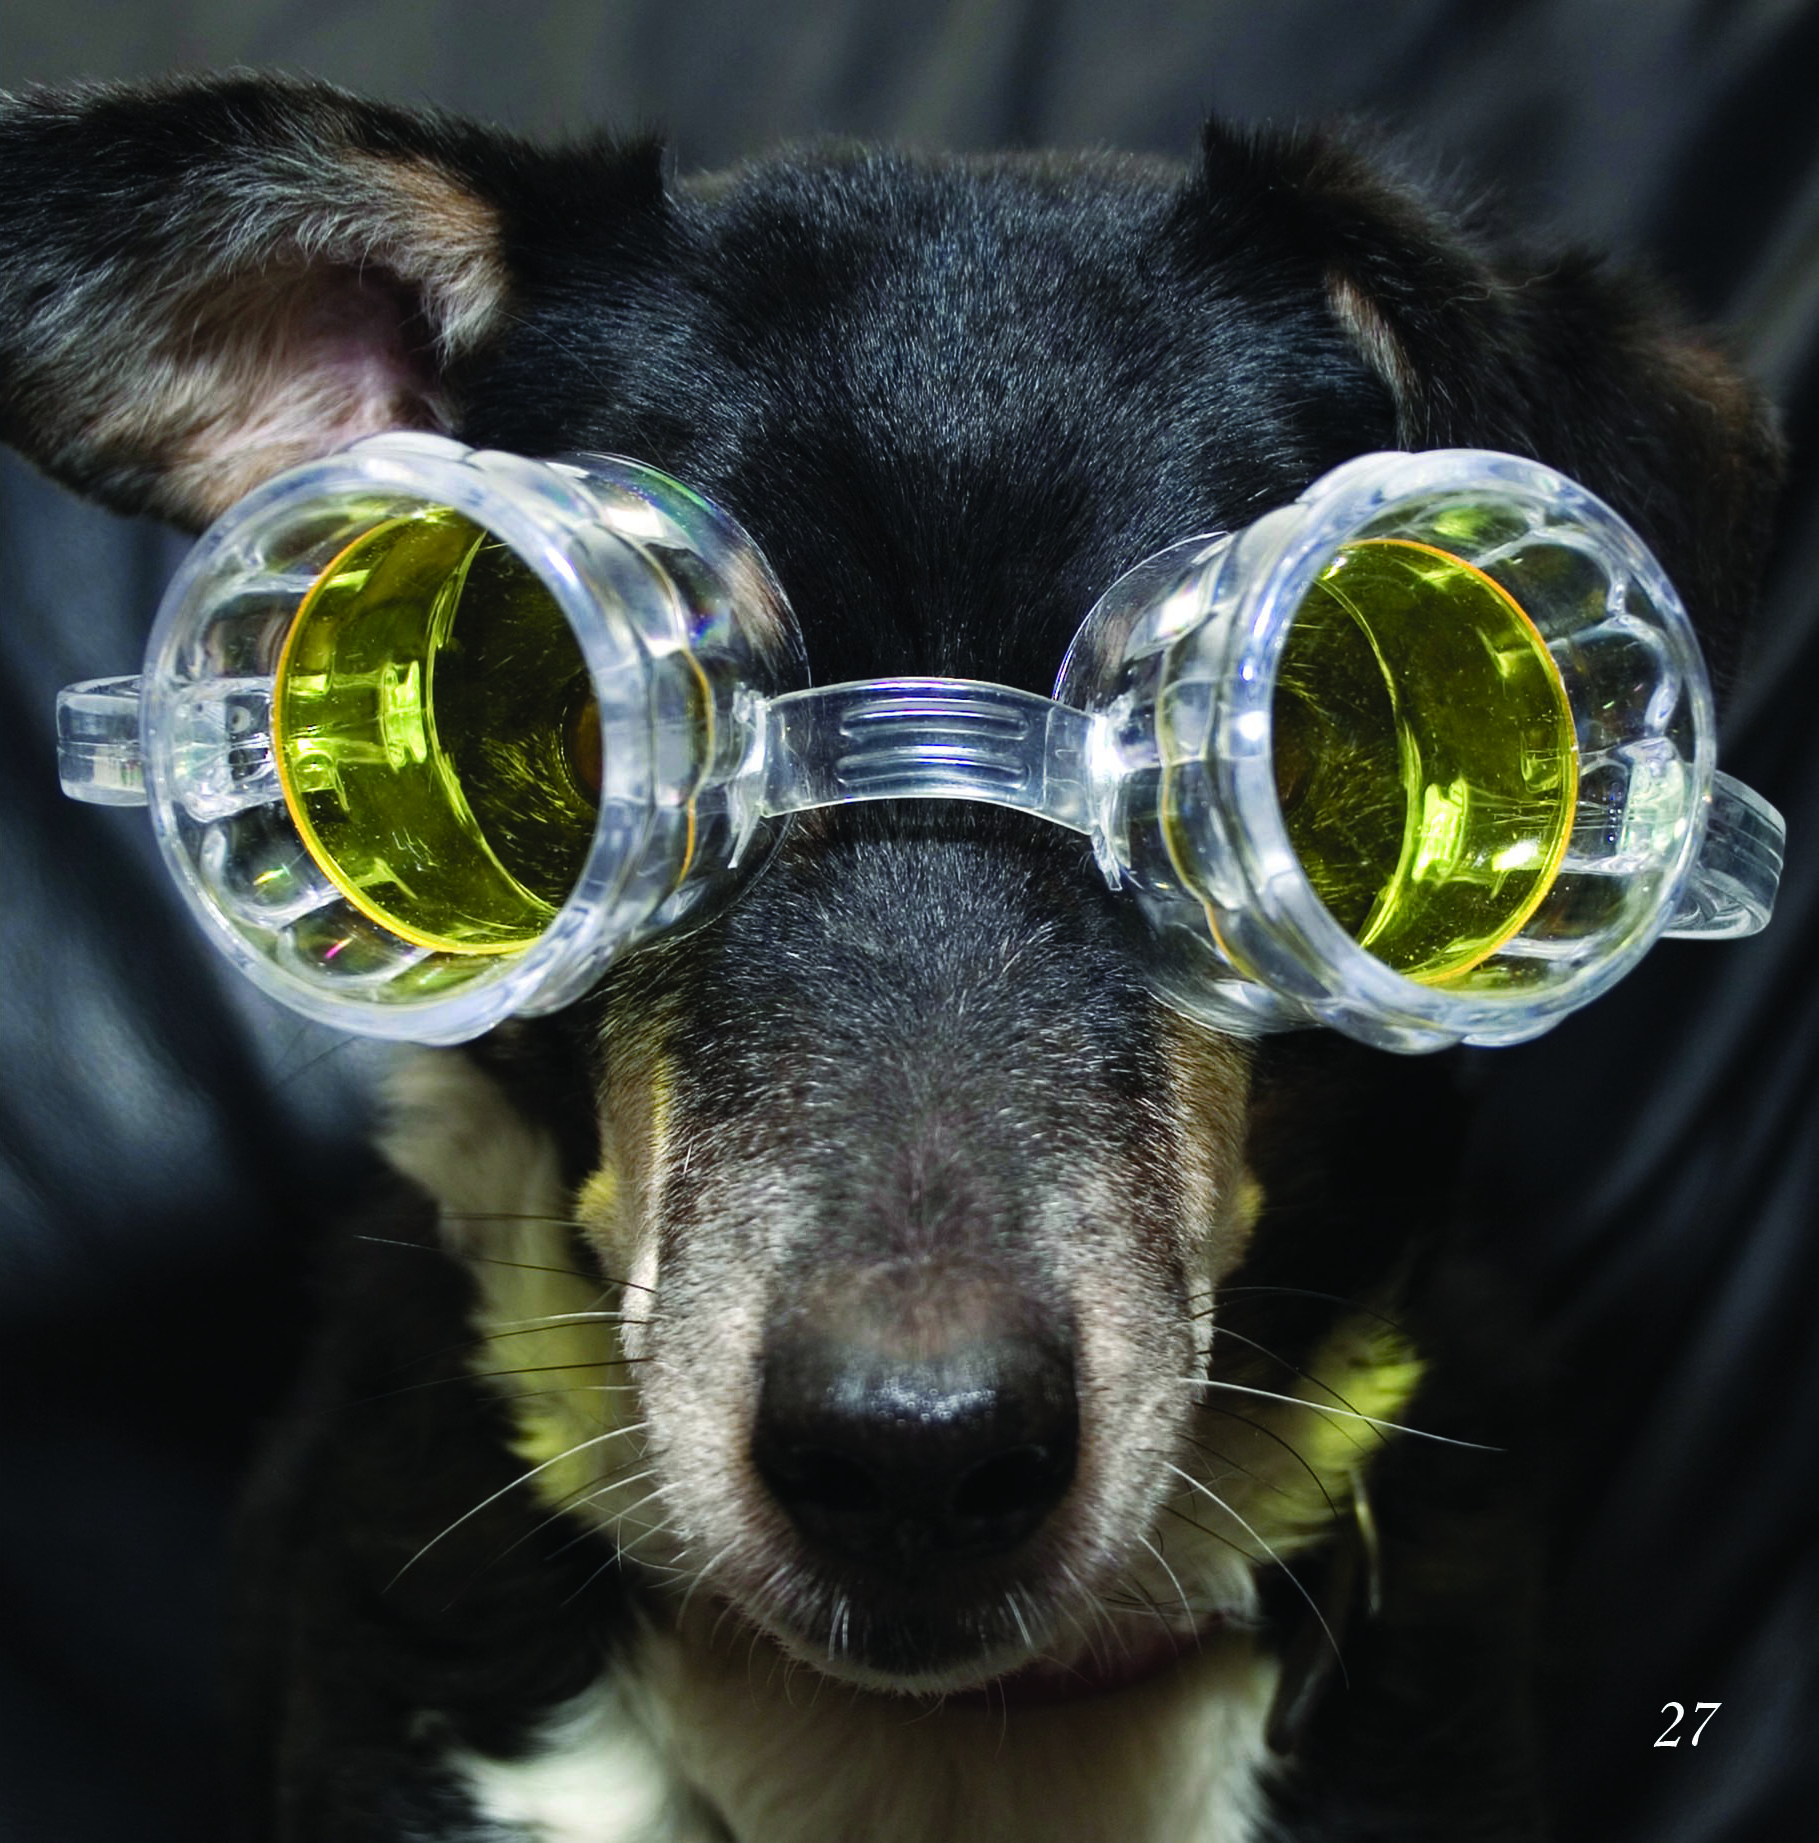 pooch with goggles